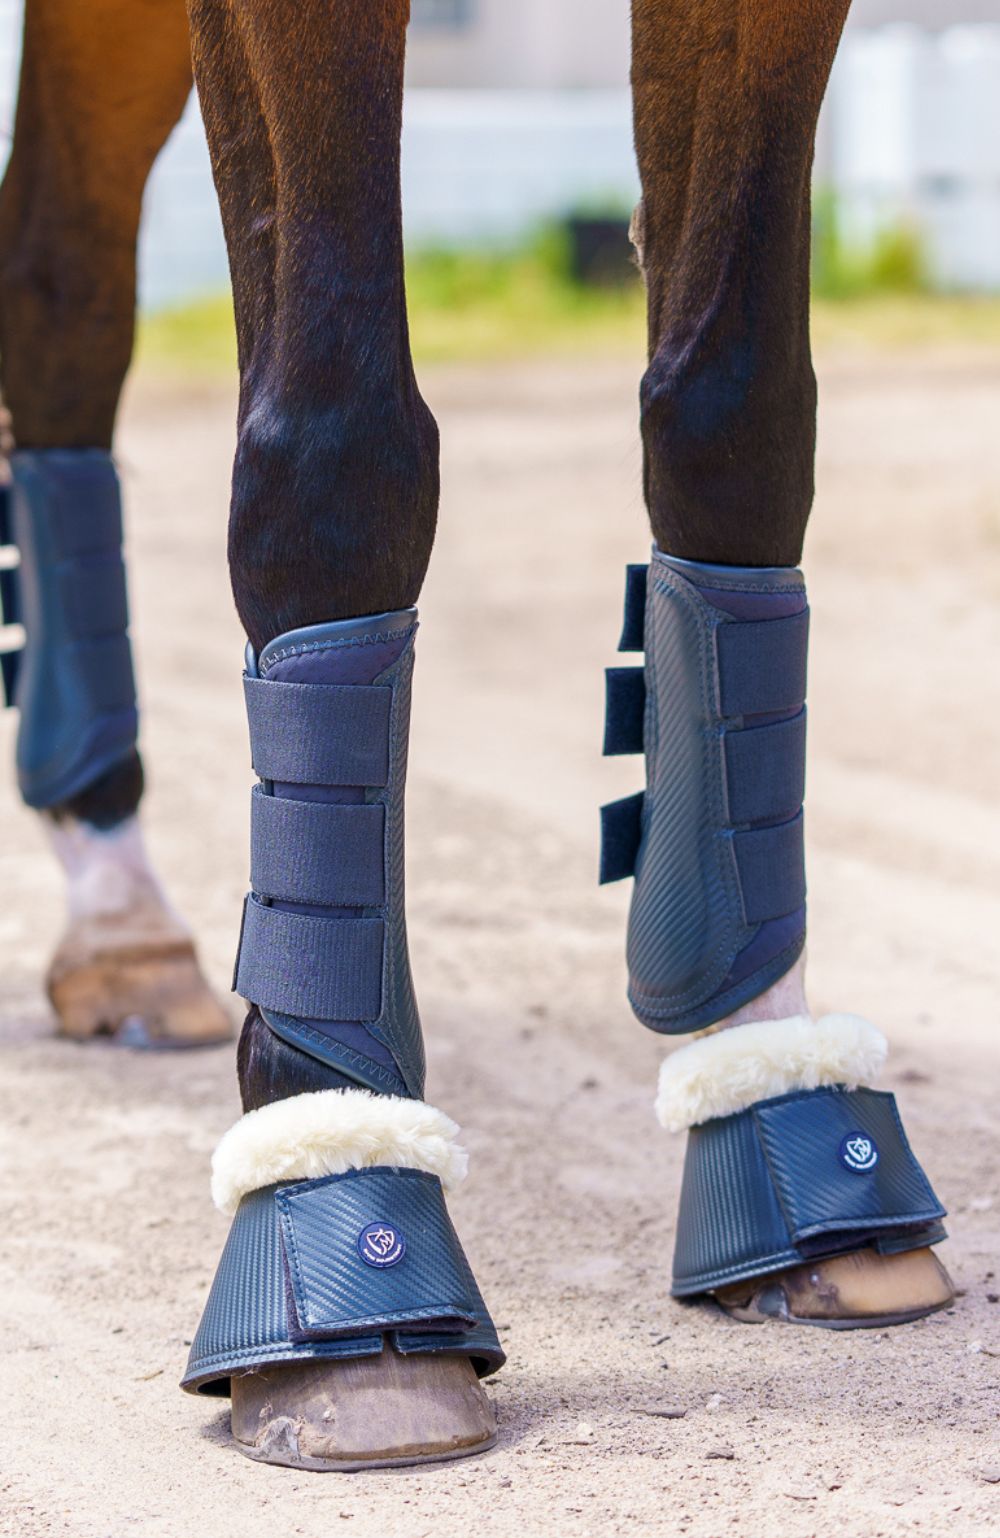 All Boots and Bandages – Bare Equestrian